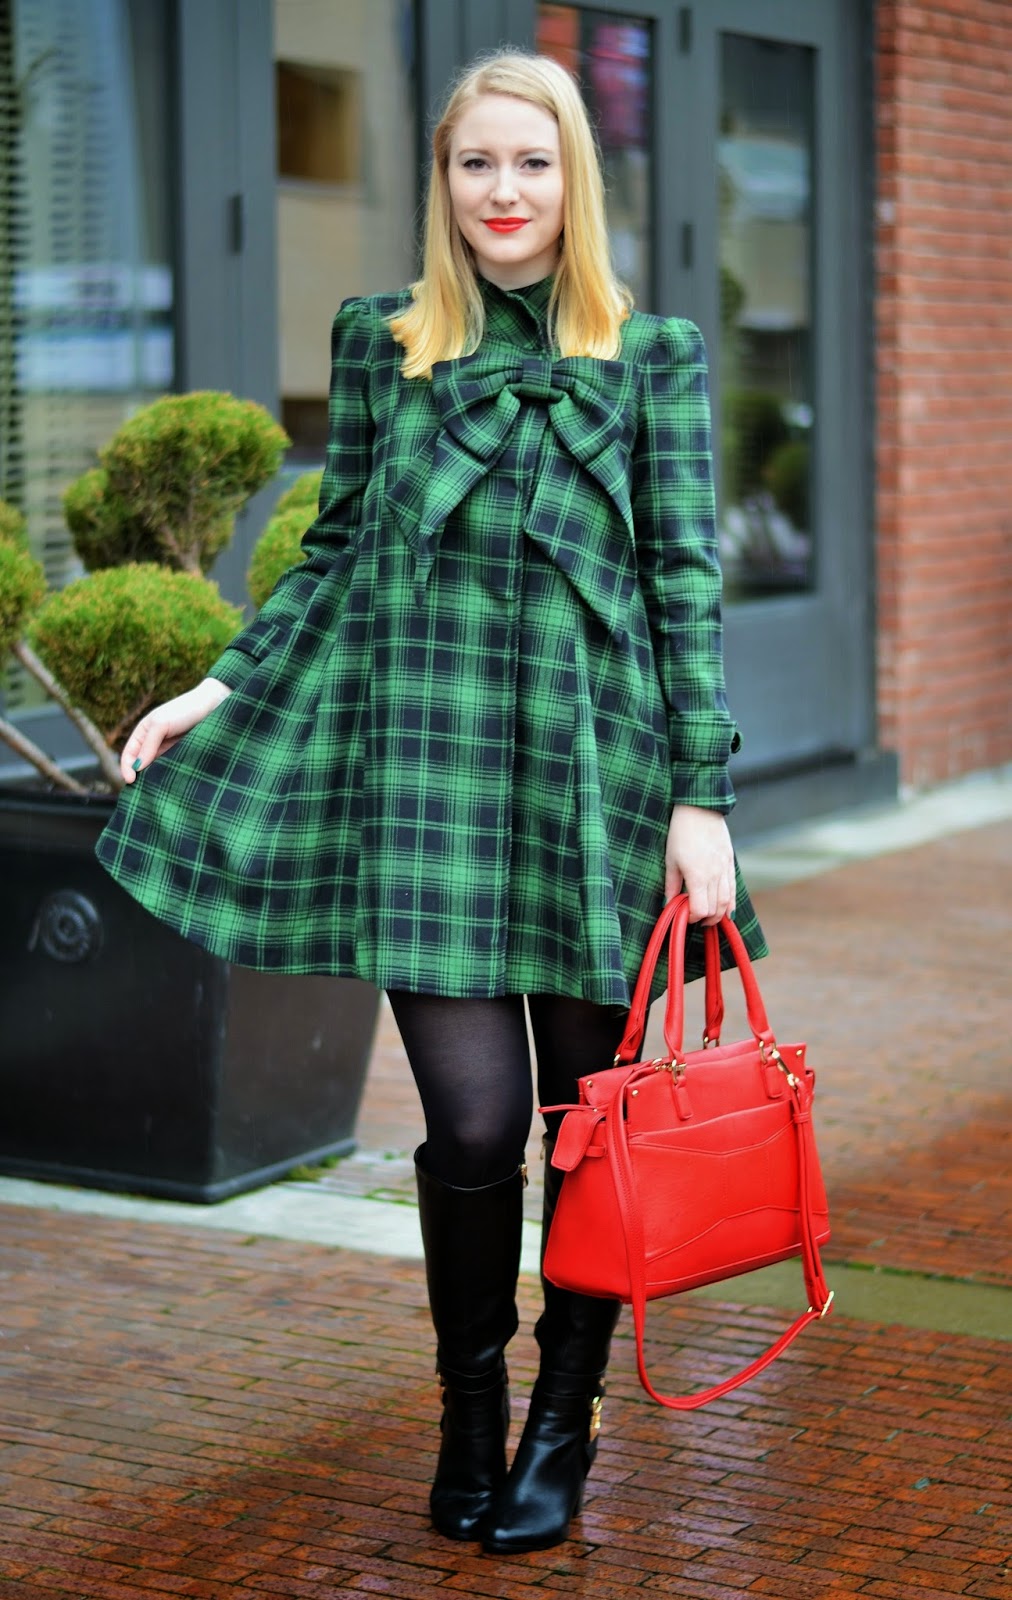 Vancouver Vogue: Look of the Week: Plaid & Bows